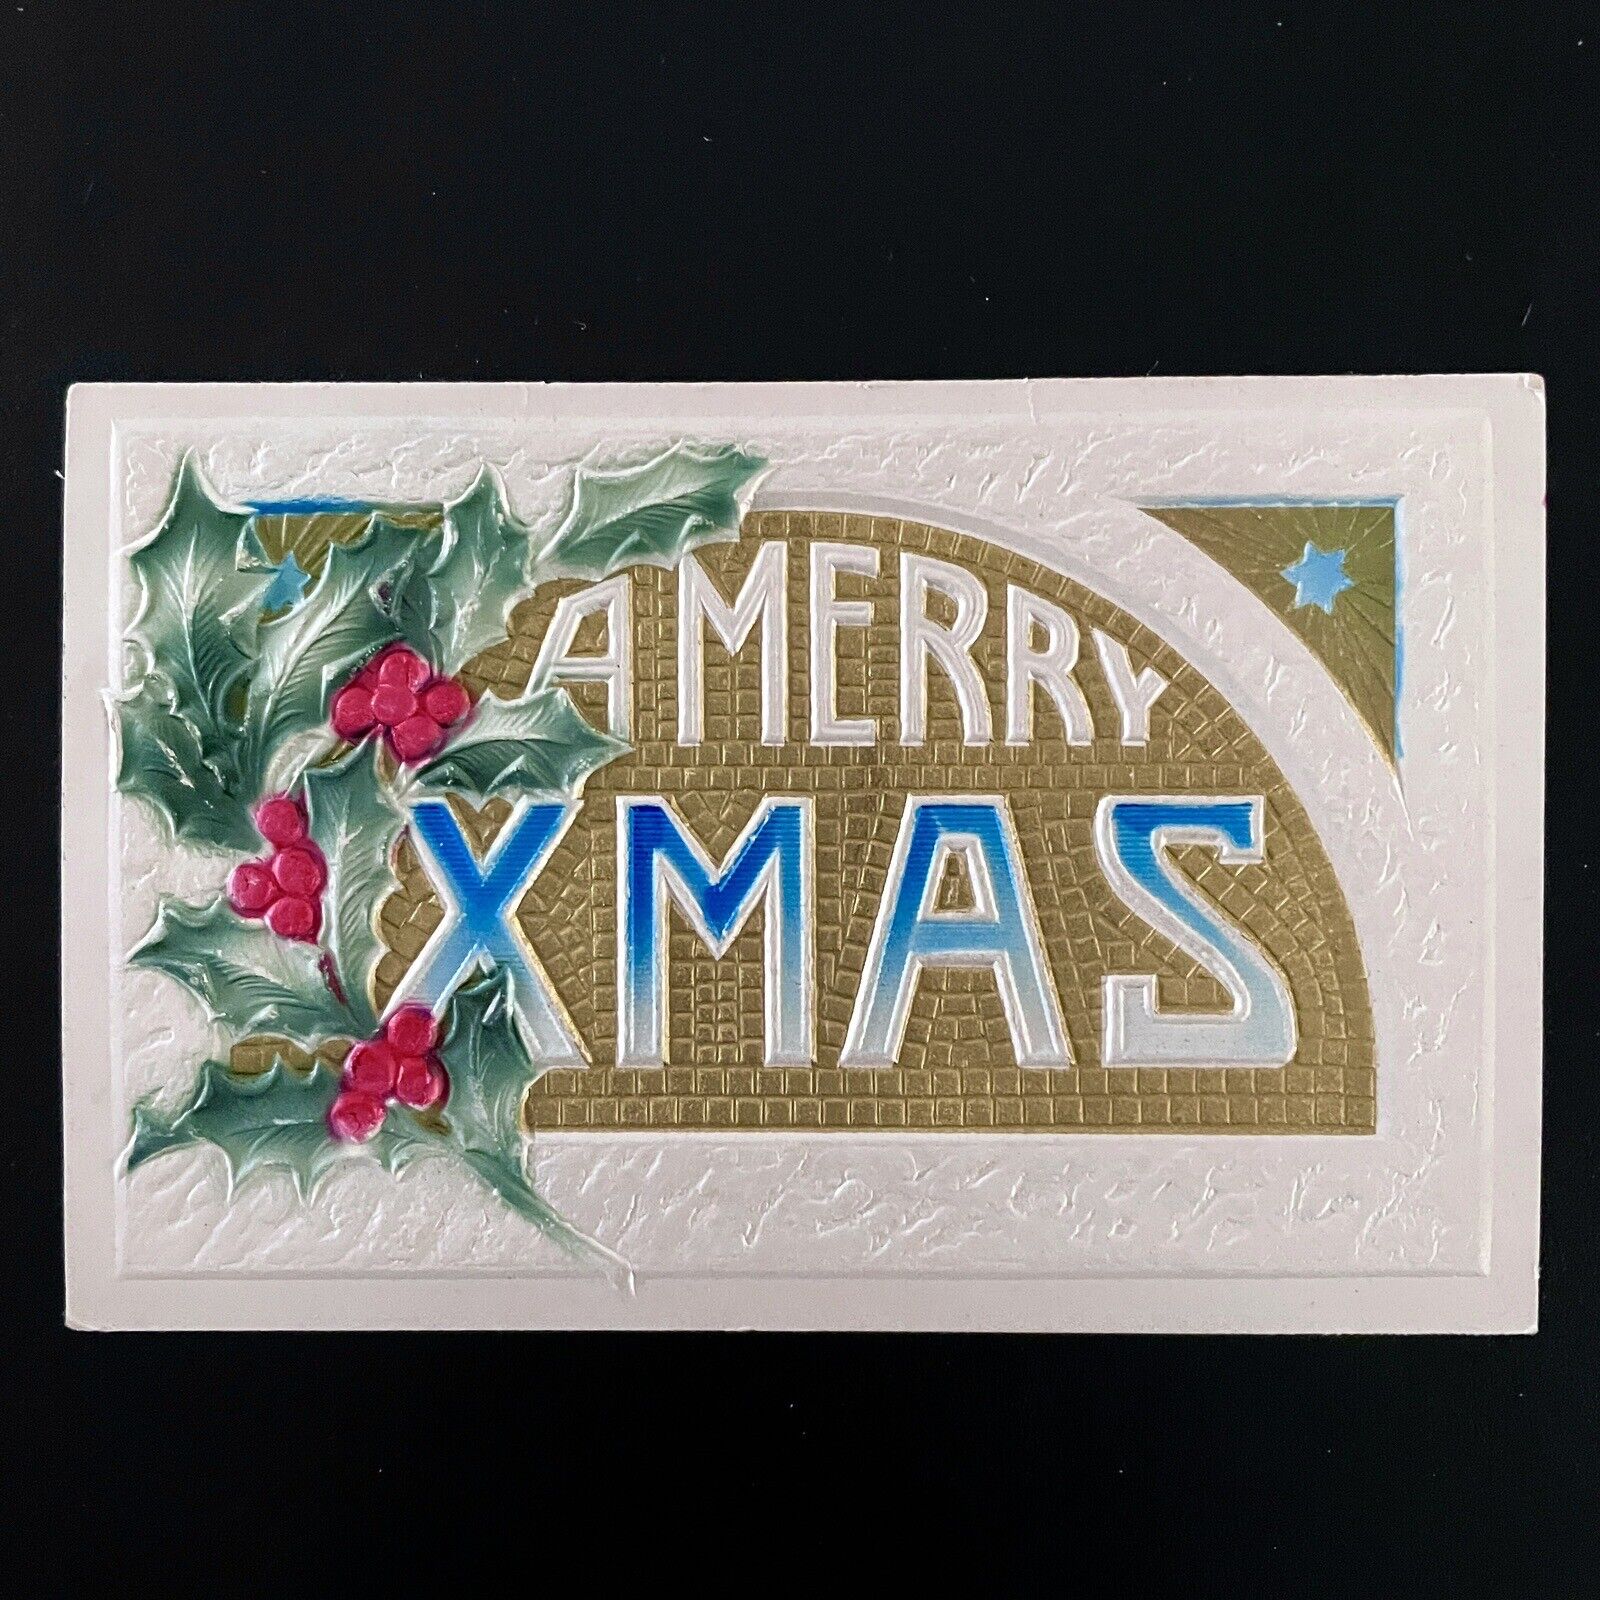 Art Noveau : A Merry XMAS : Stunning Postcard Heavily Embossed & Airbrushed